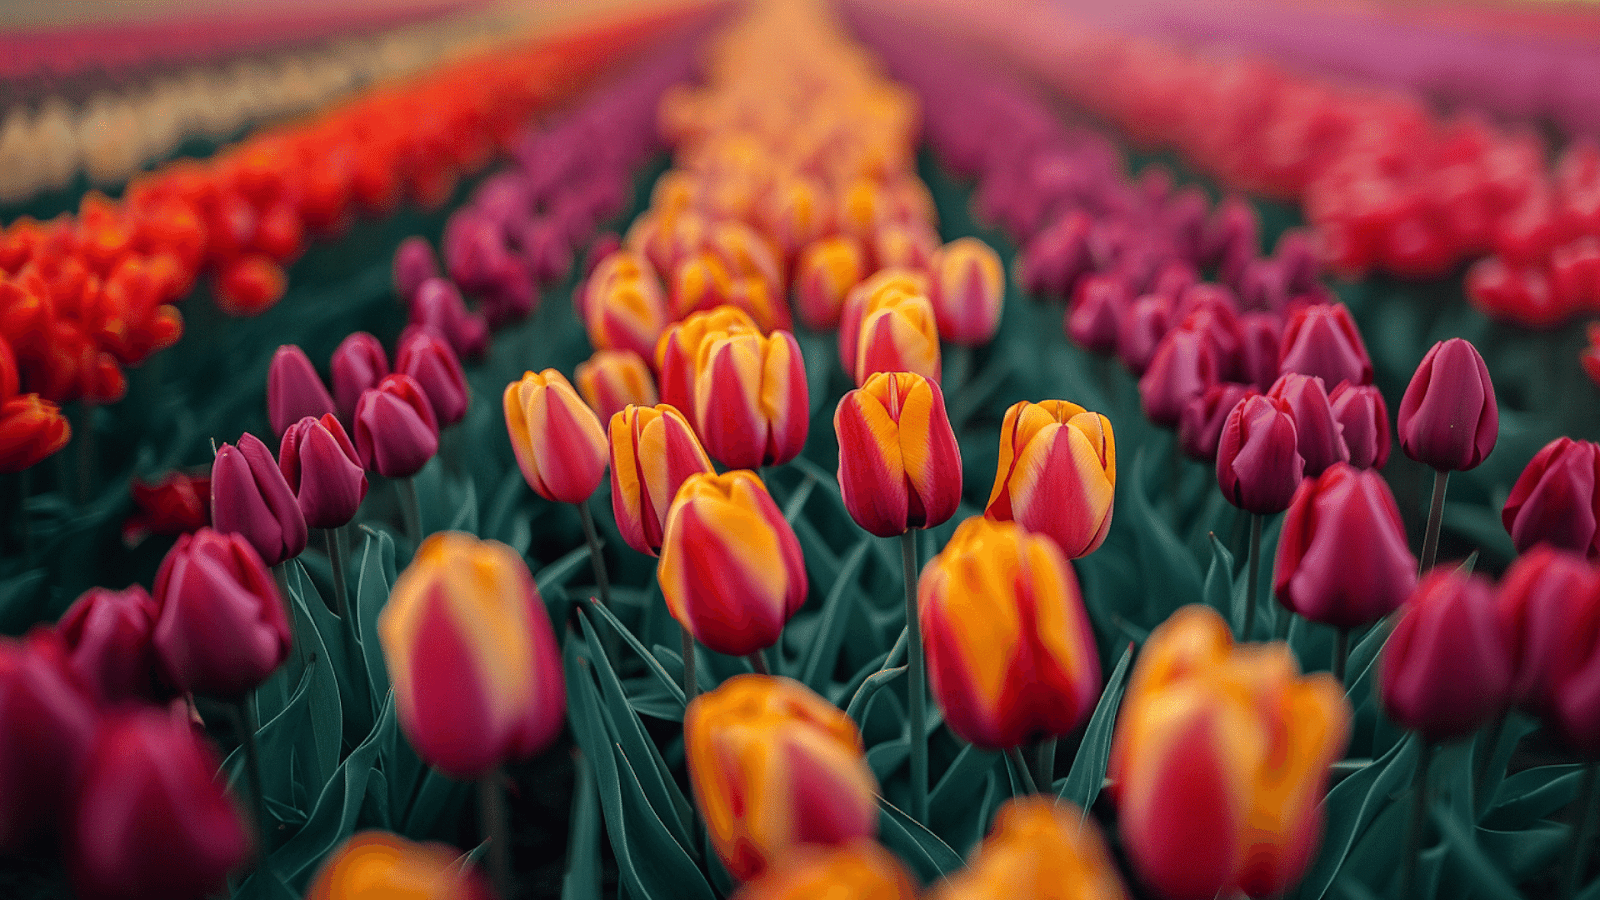 Vibrant tulip fields in bloom in the Netherlands, where to travel in Europe for spring's colorful displays